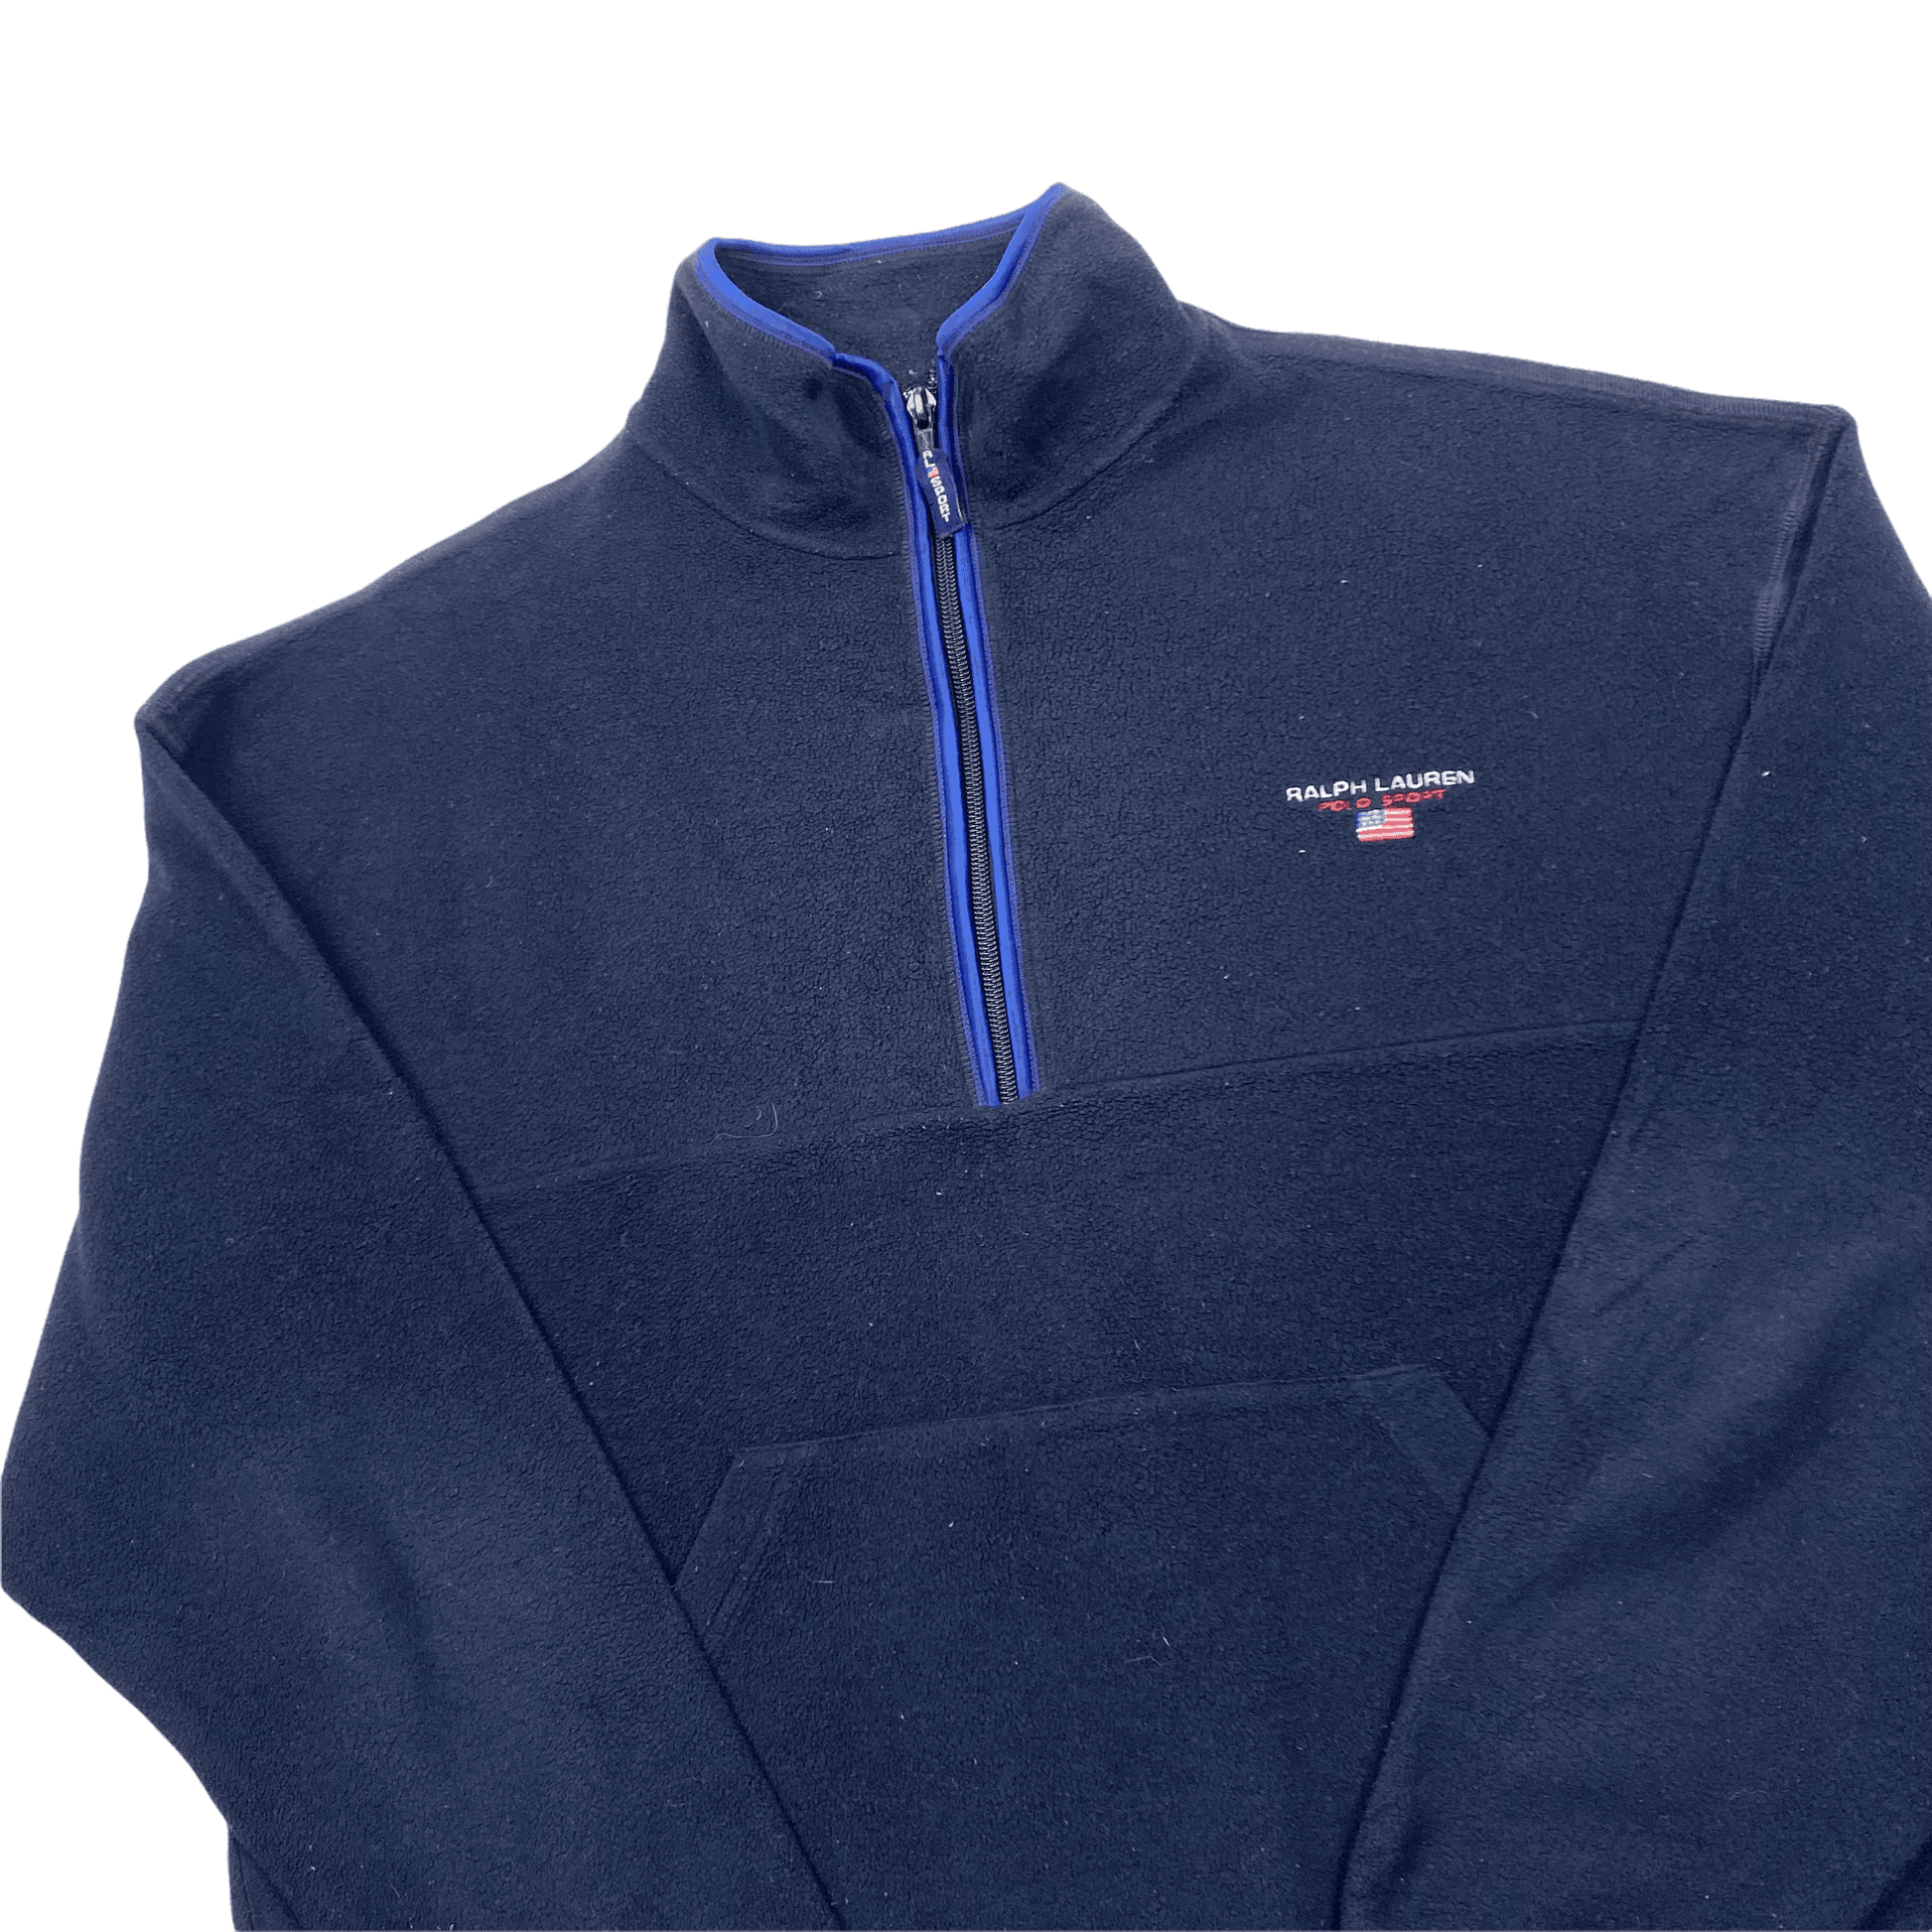 Vintage 90s Navy Blue Ralph Lauren Polo Sport Spell-Out Quarter Zip Fleece - Large (Recommended Size - Small) - The Streetwear Studio